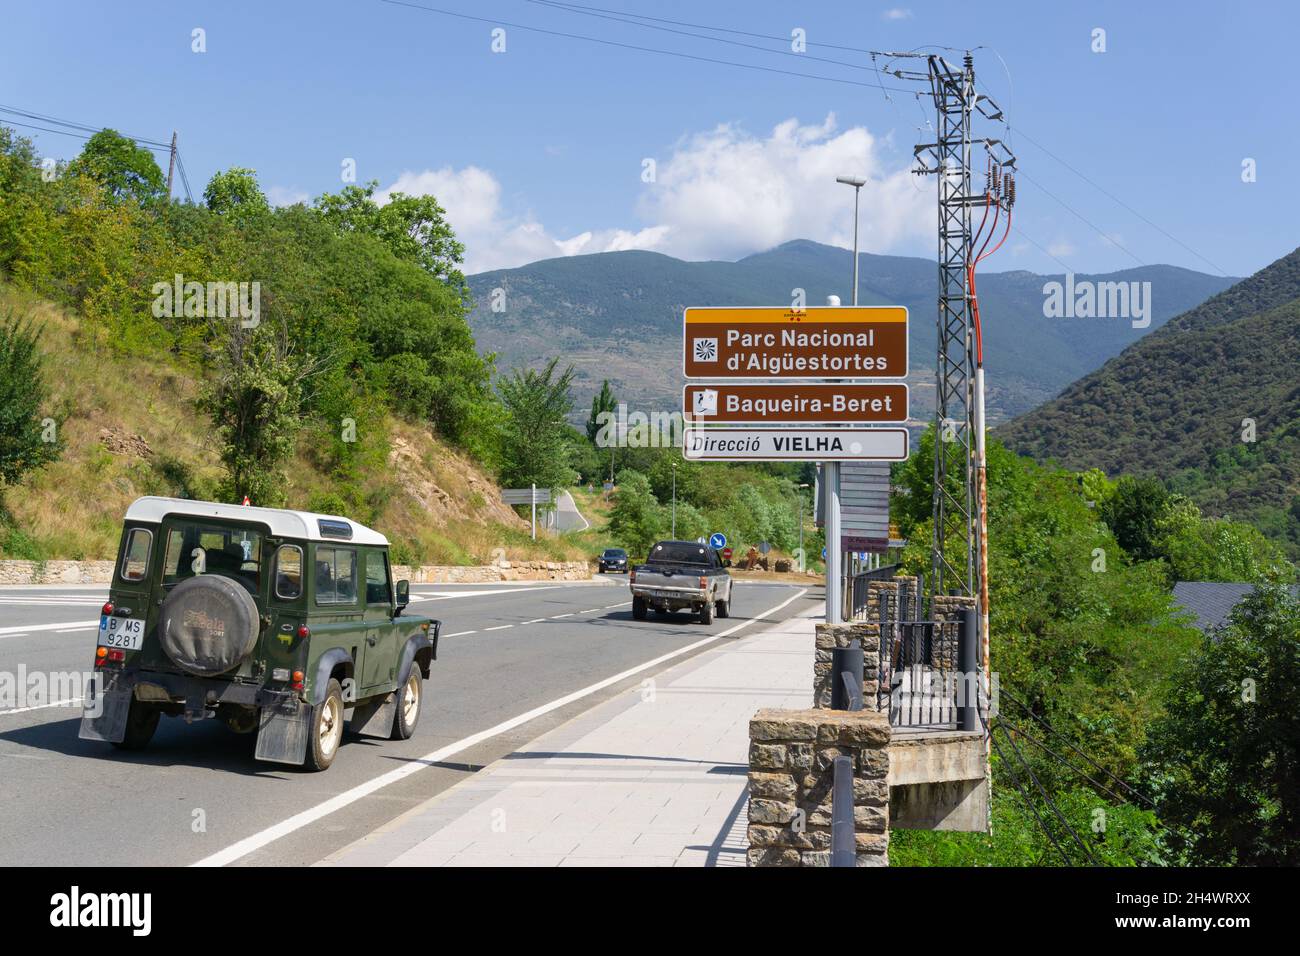 SORT, SPAIN - July 27, 2021: Image of a road between mountains with a traffic sign with different locations towards the town of Vielha in the region o Stock Photo